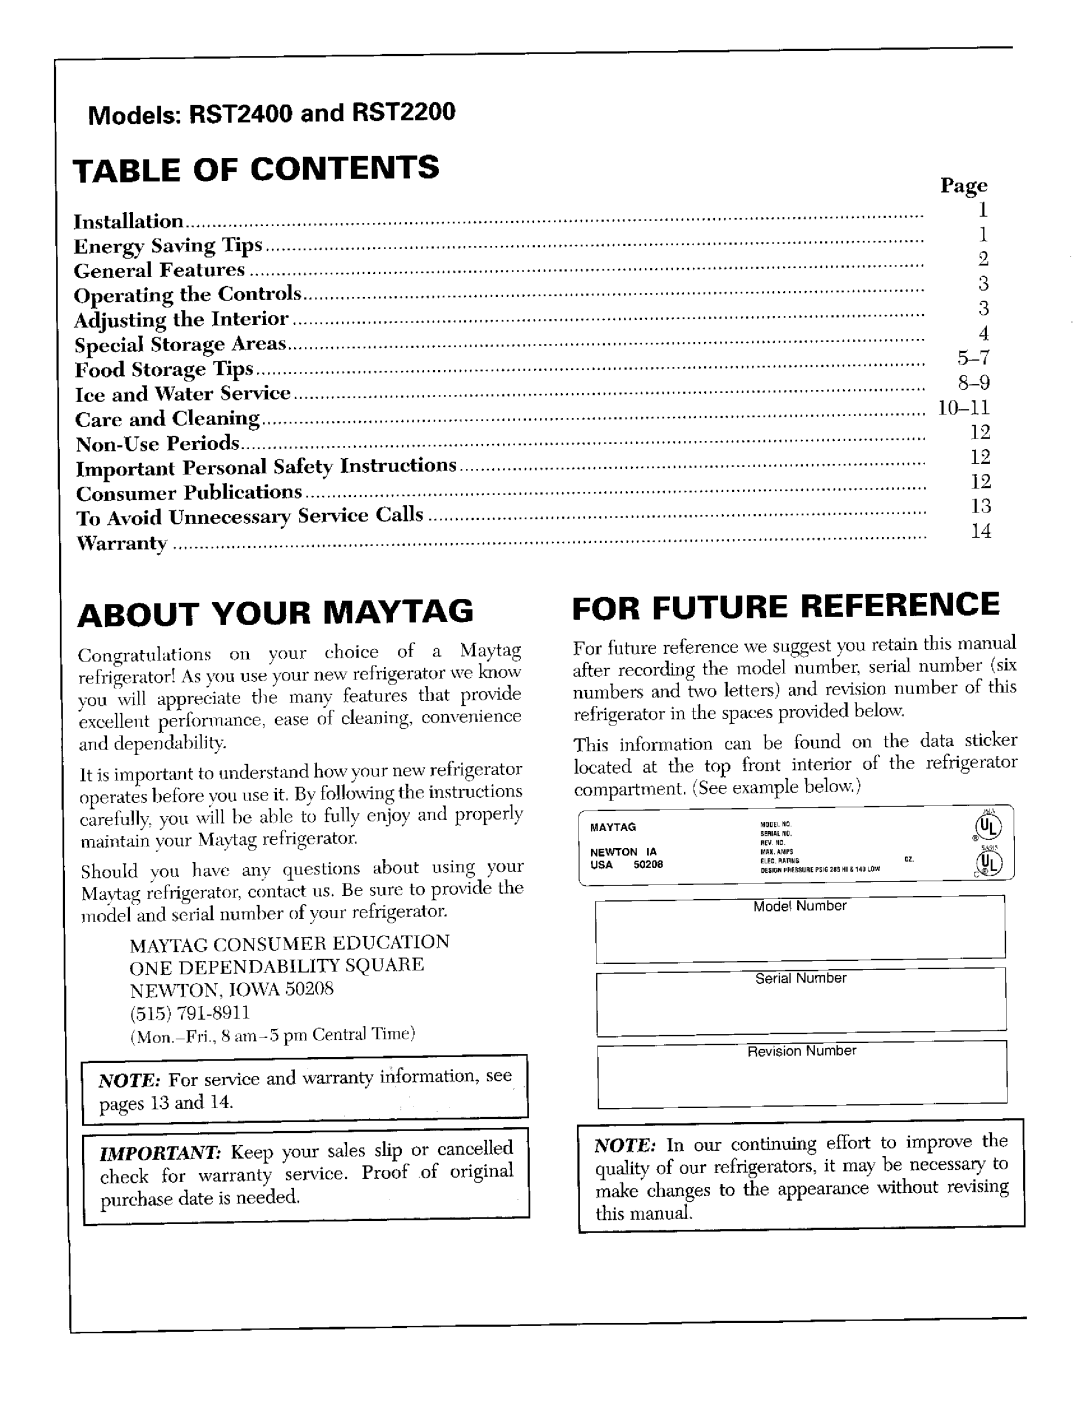 Maytag warranty Table Of Contents, About Your Maytag, For Future Reference, Models RST2400 and RST2200, Food Storage 